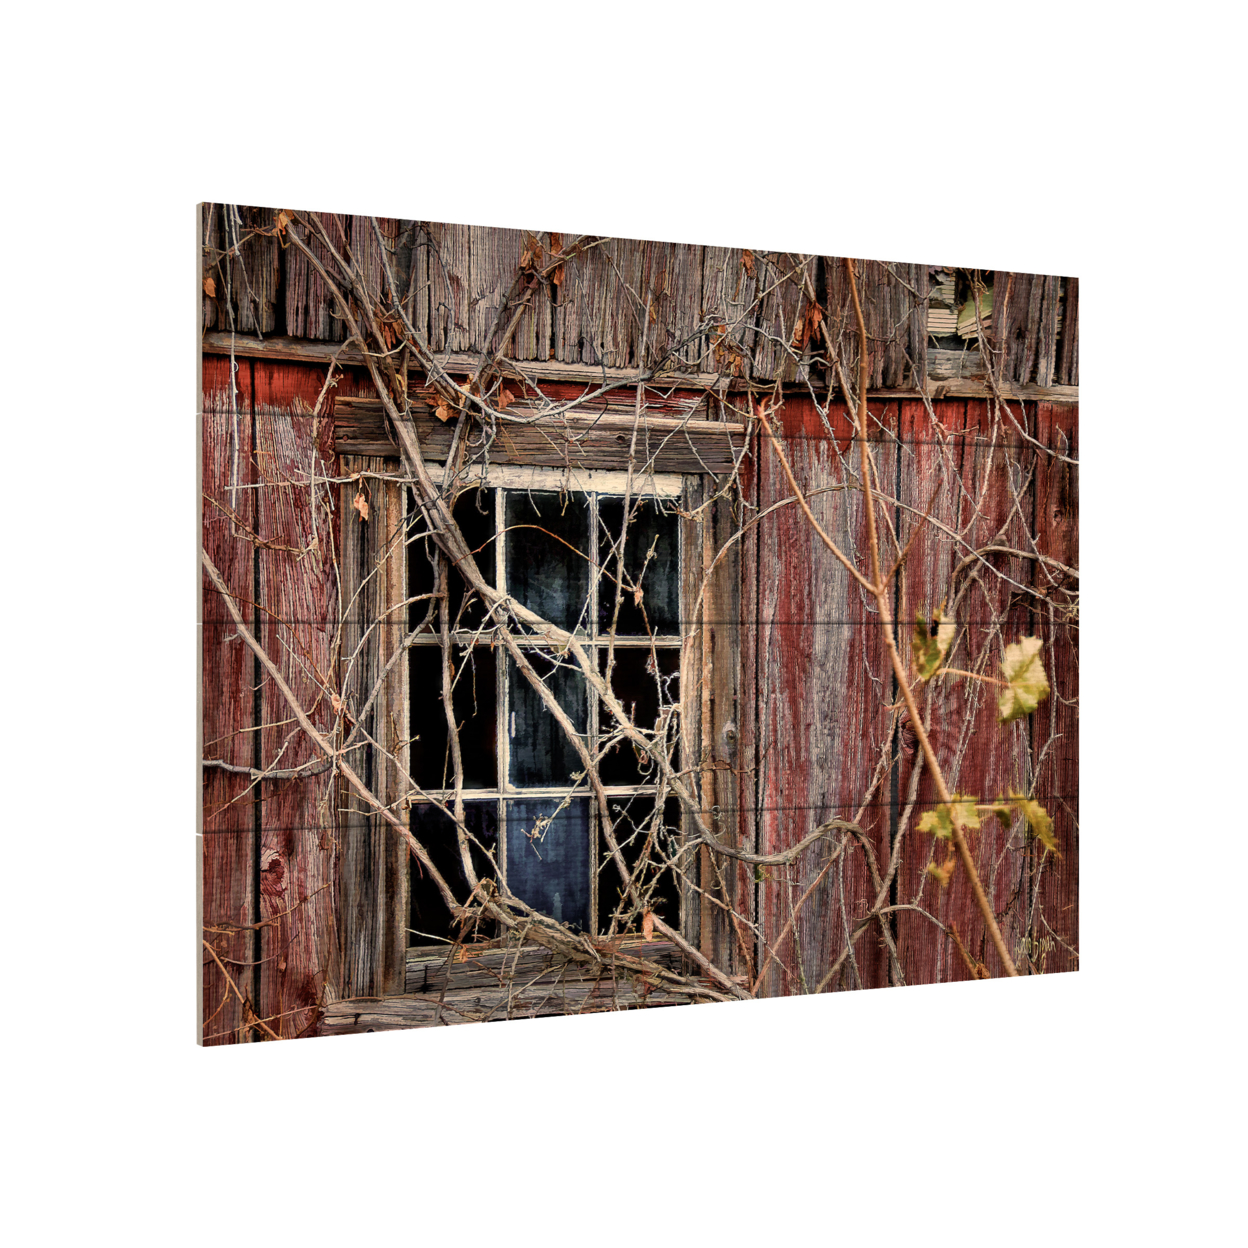 Wall Art 12 X 16 Inches Titled Old Barn Window Ready To Hang Printed On Wooden Planks